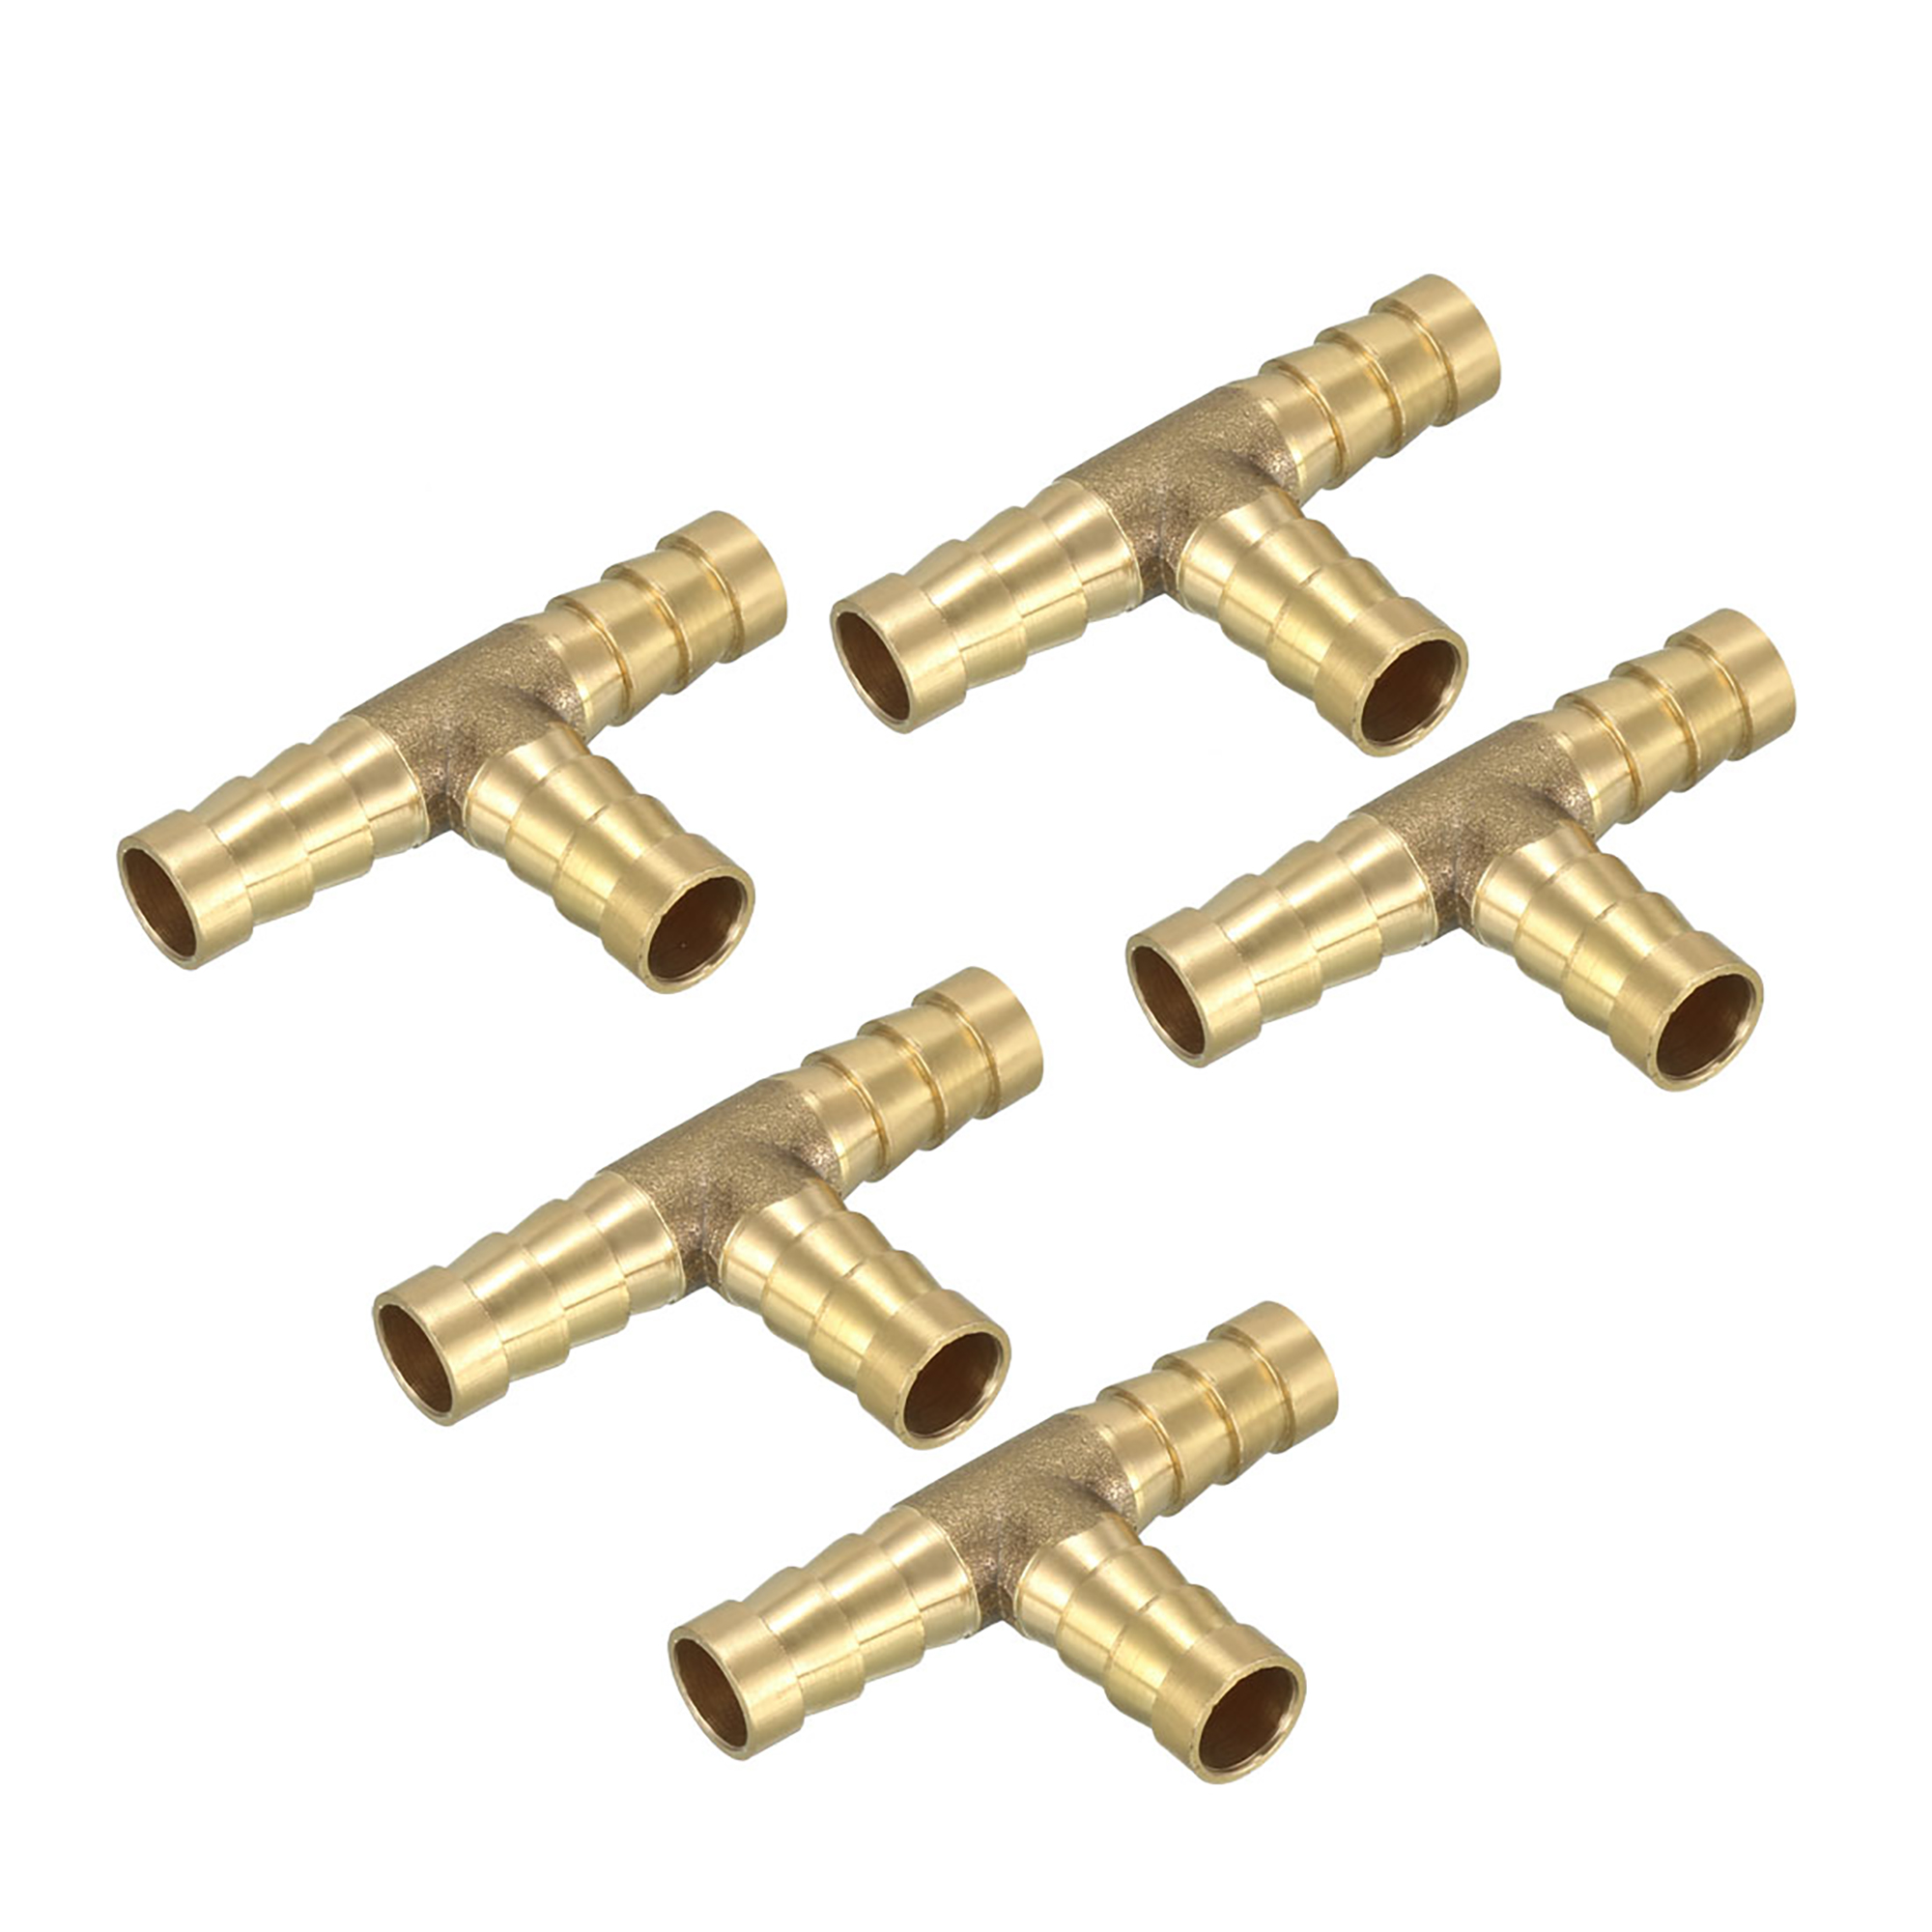 Unique Bargains 10mm Brass Barb Hose Fitting Tee T 3 Way Barbed Connector Air Water Fuel 5pcs